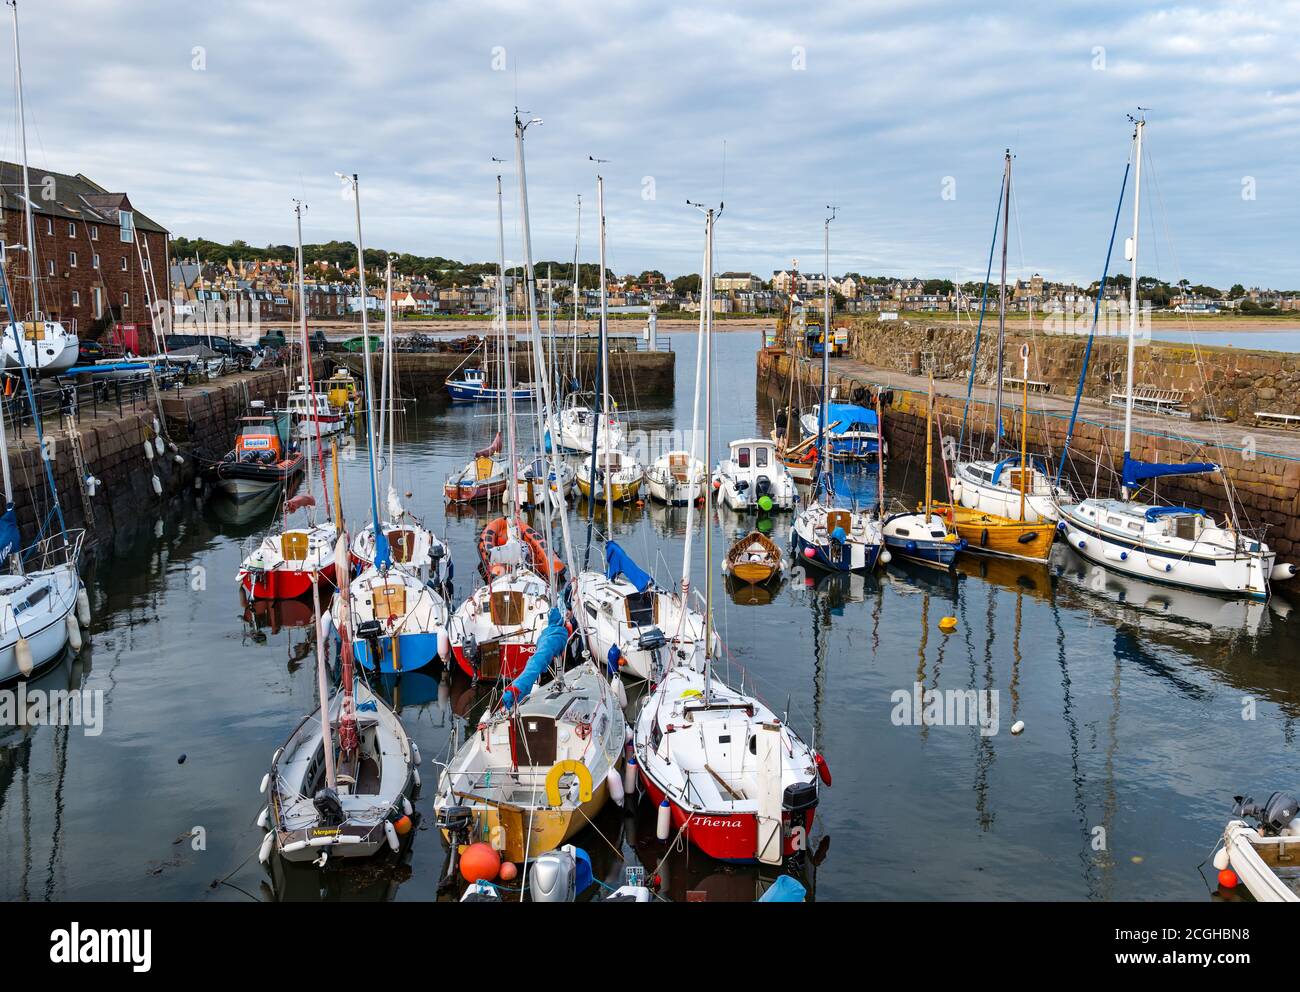 Sailing boats and yachts in the harbour, North Berwick, East Lothian, Scotland, UK Stock Photo